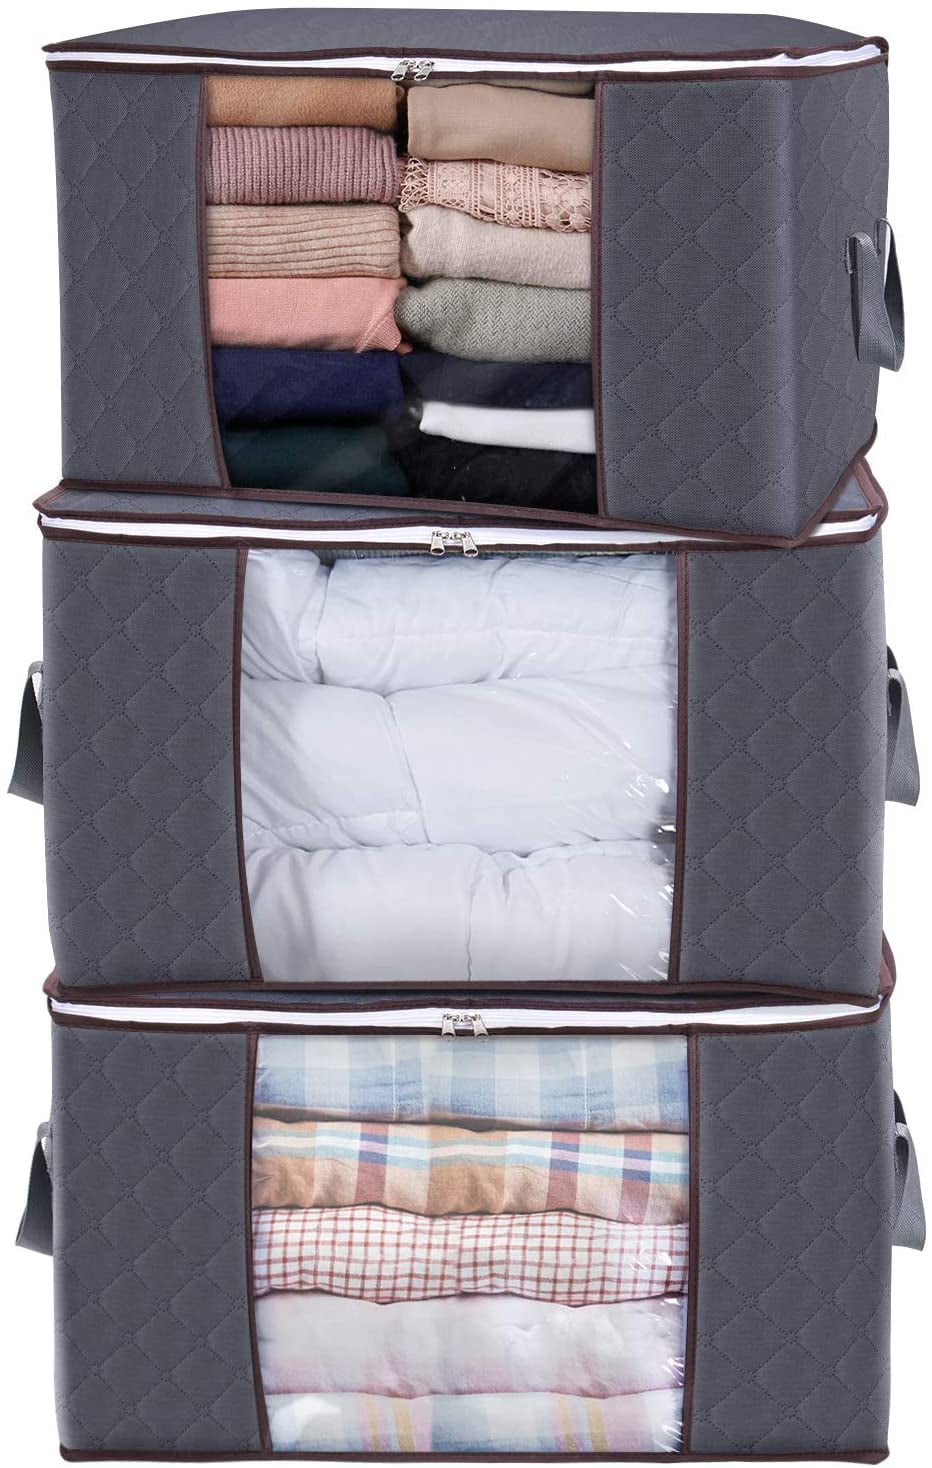 Foldable with Sturdy Zipper Quilt storage bag Large Capacity Clothes Storage Bag Organizer with Reinforced Handle Thick Fabric for Comforters Blankets Bedding 3 pieces Clear Window 